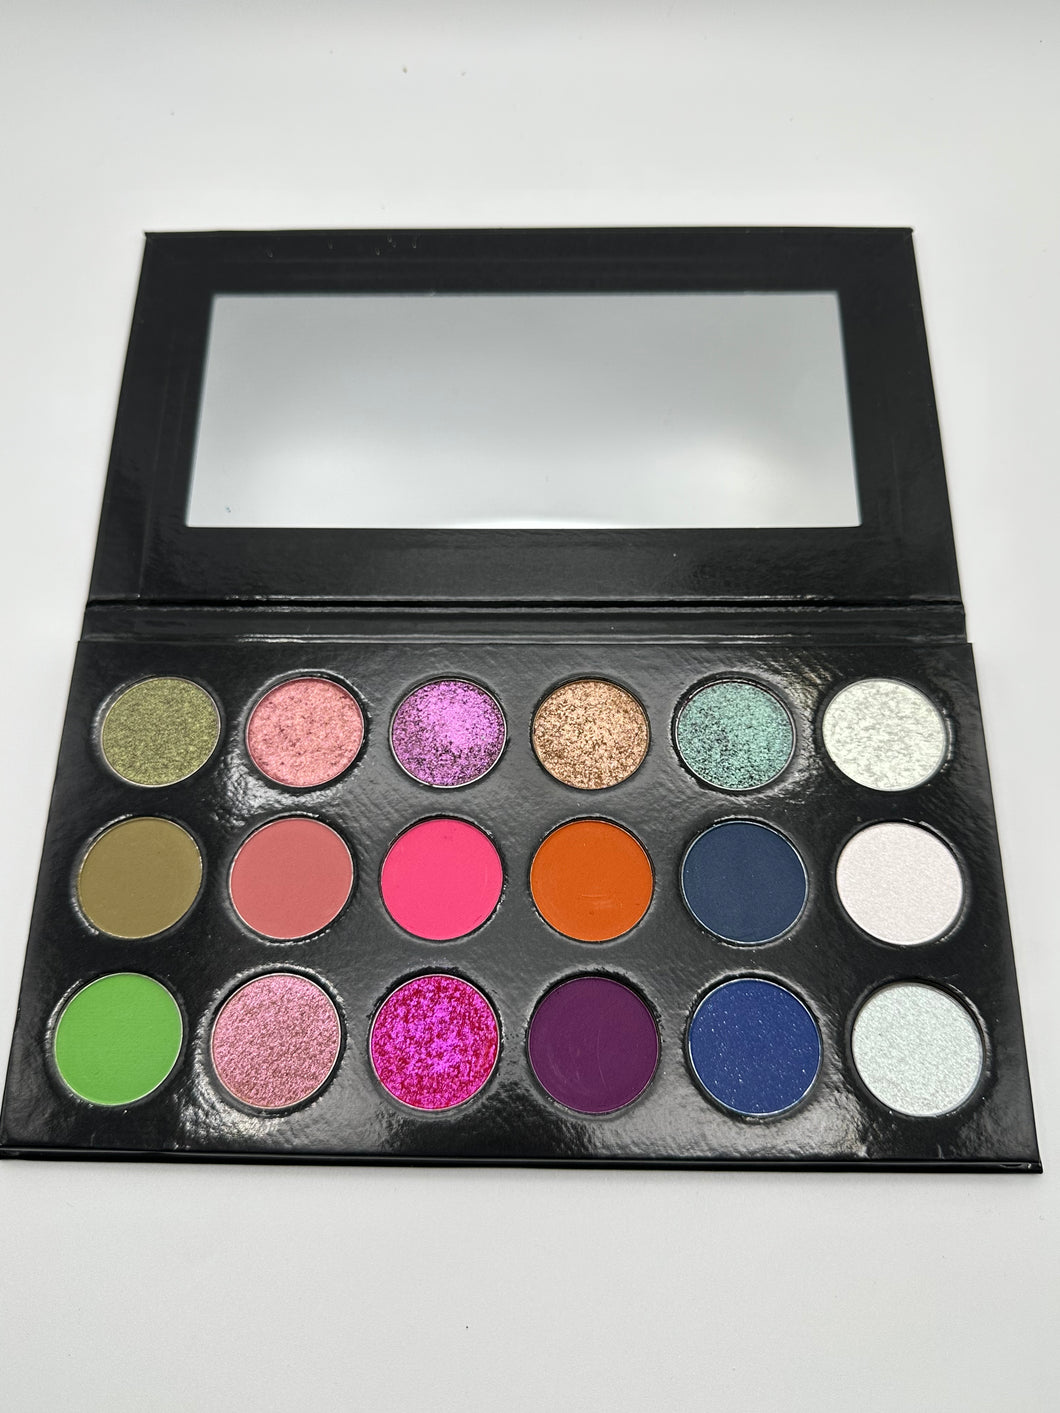 Luke 1.45 Palette Clearance Discontinued Packaging